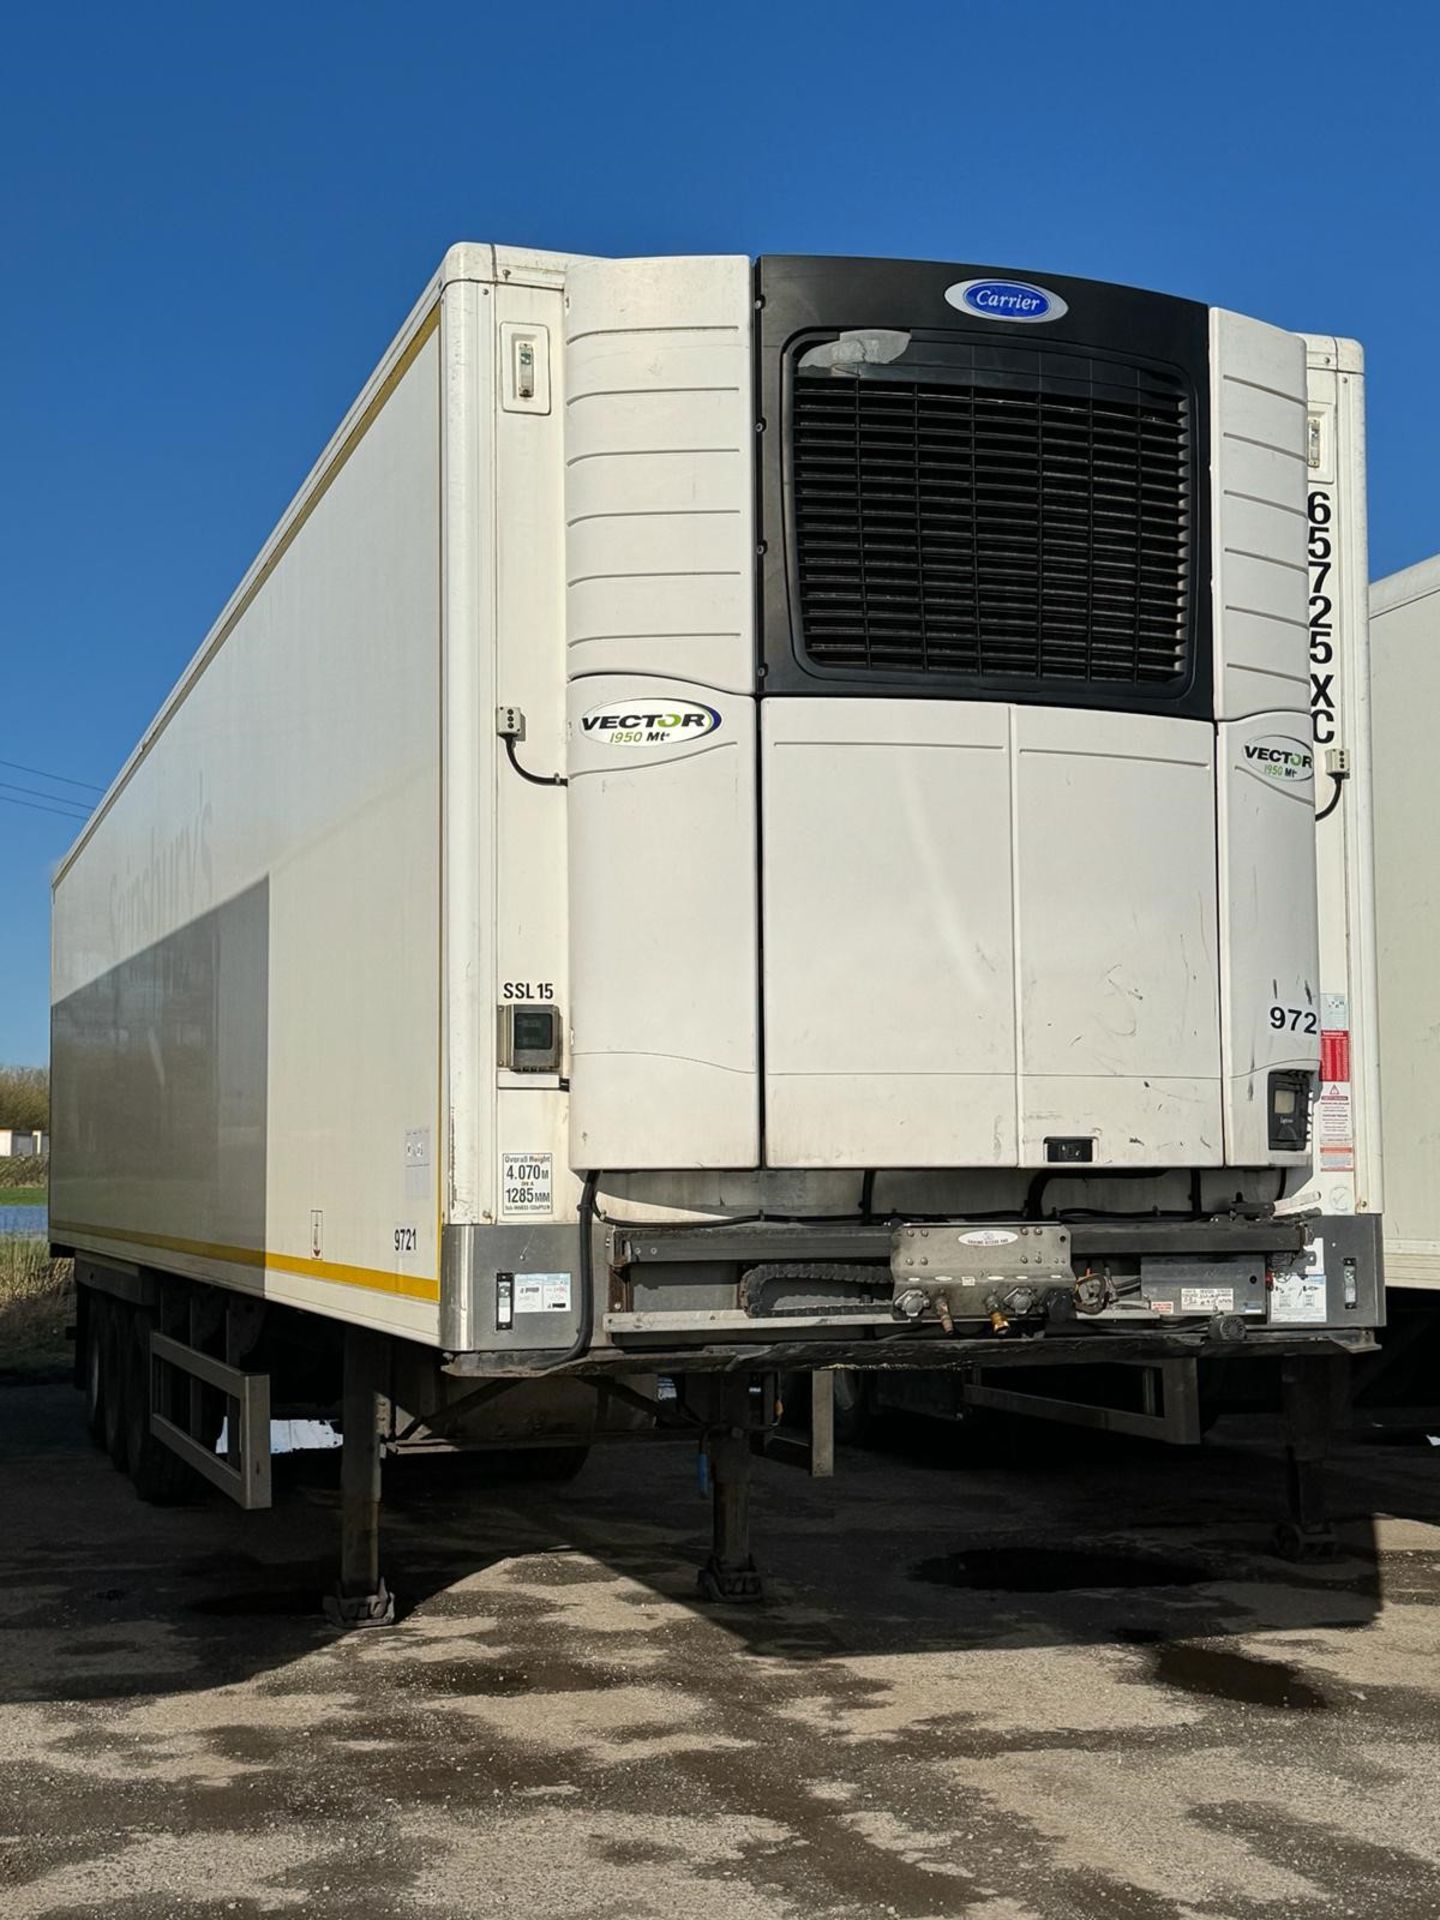 2015 Montracon 13.6 Refrigerated Multi-Temp Trailer - Image 3 of 13